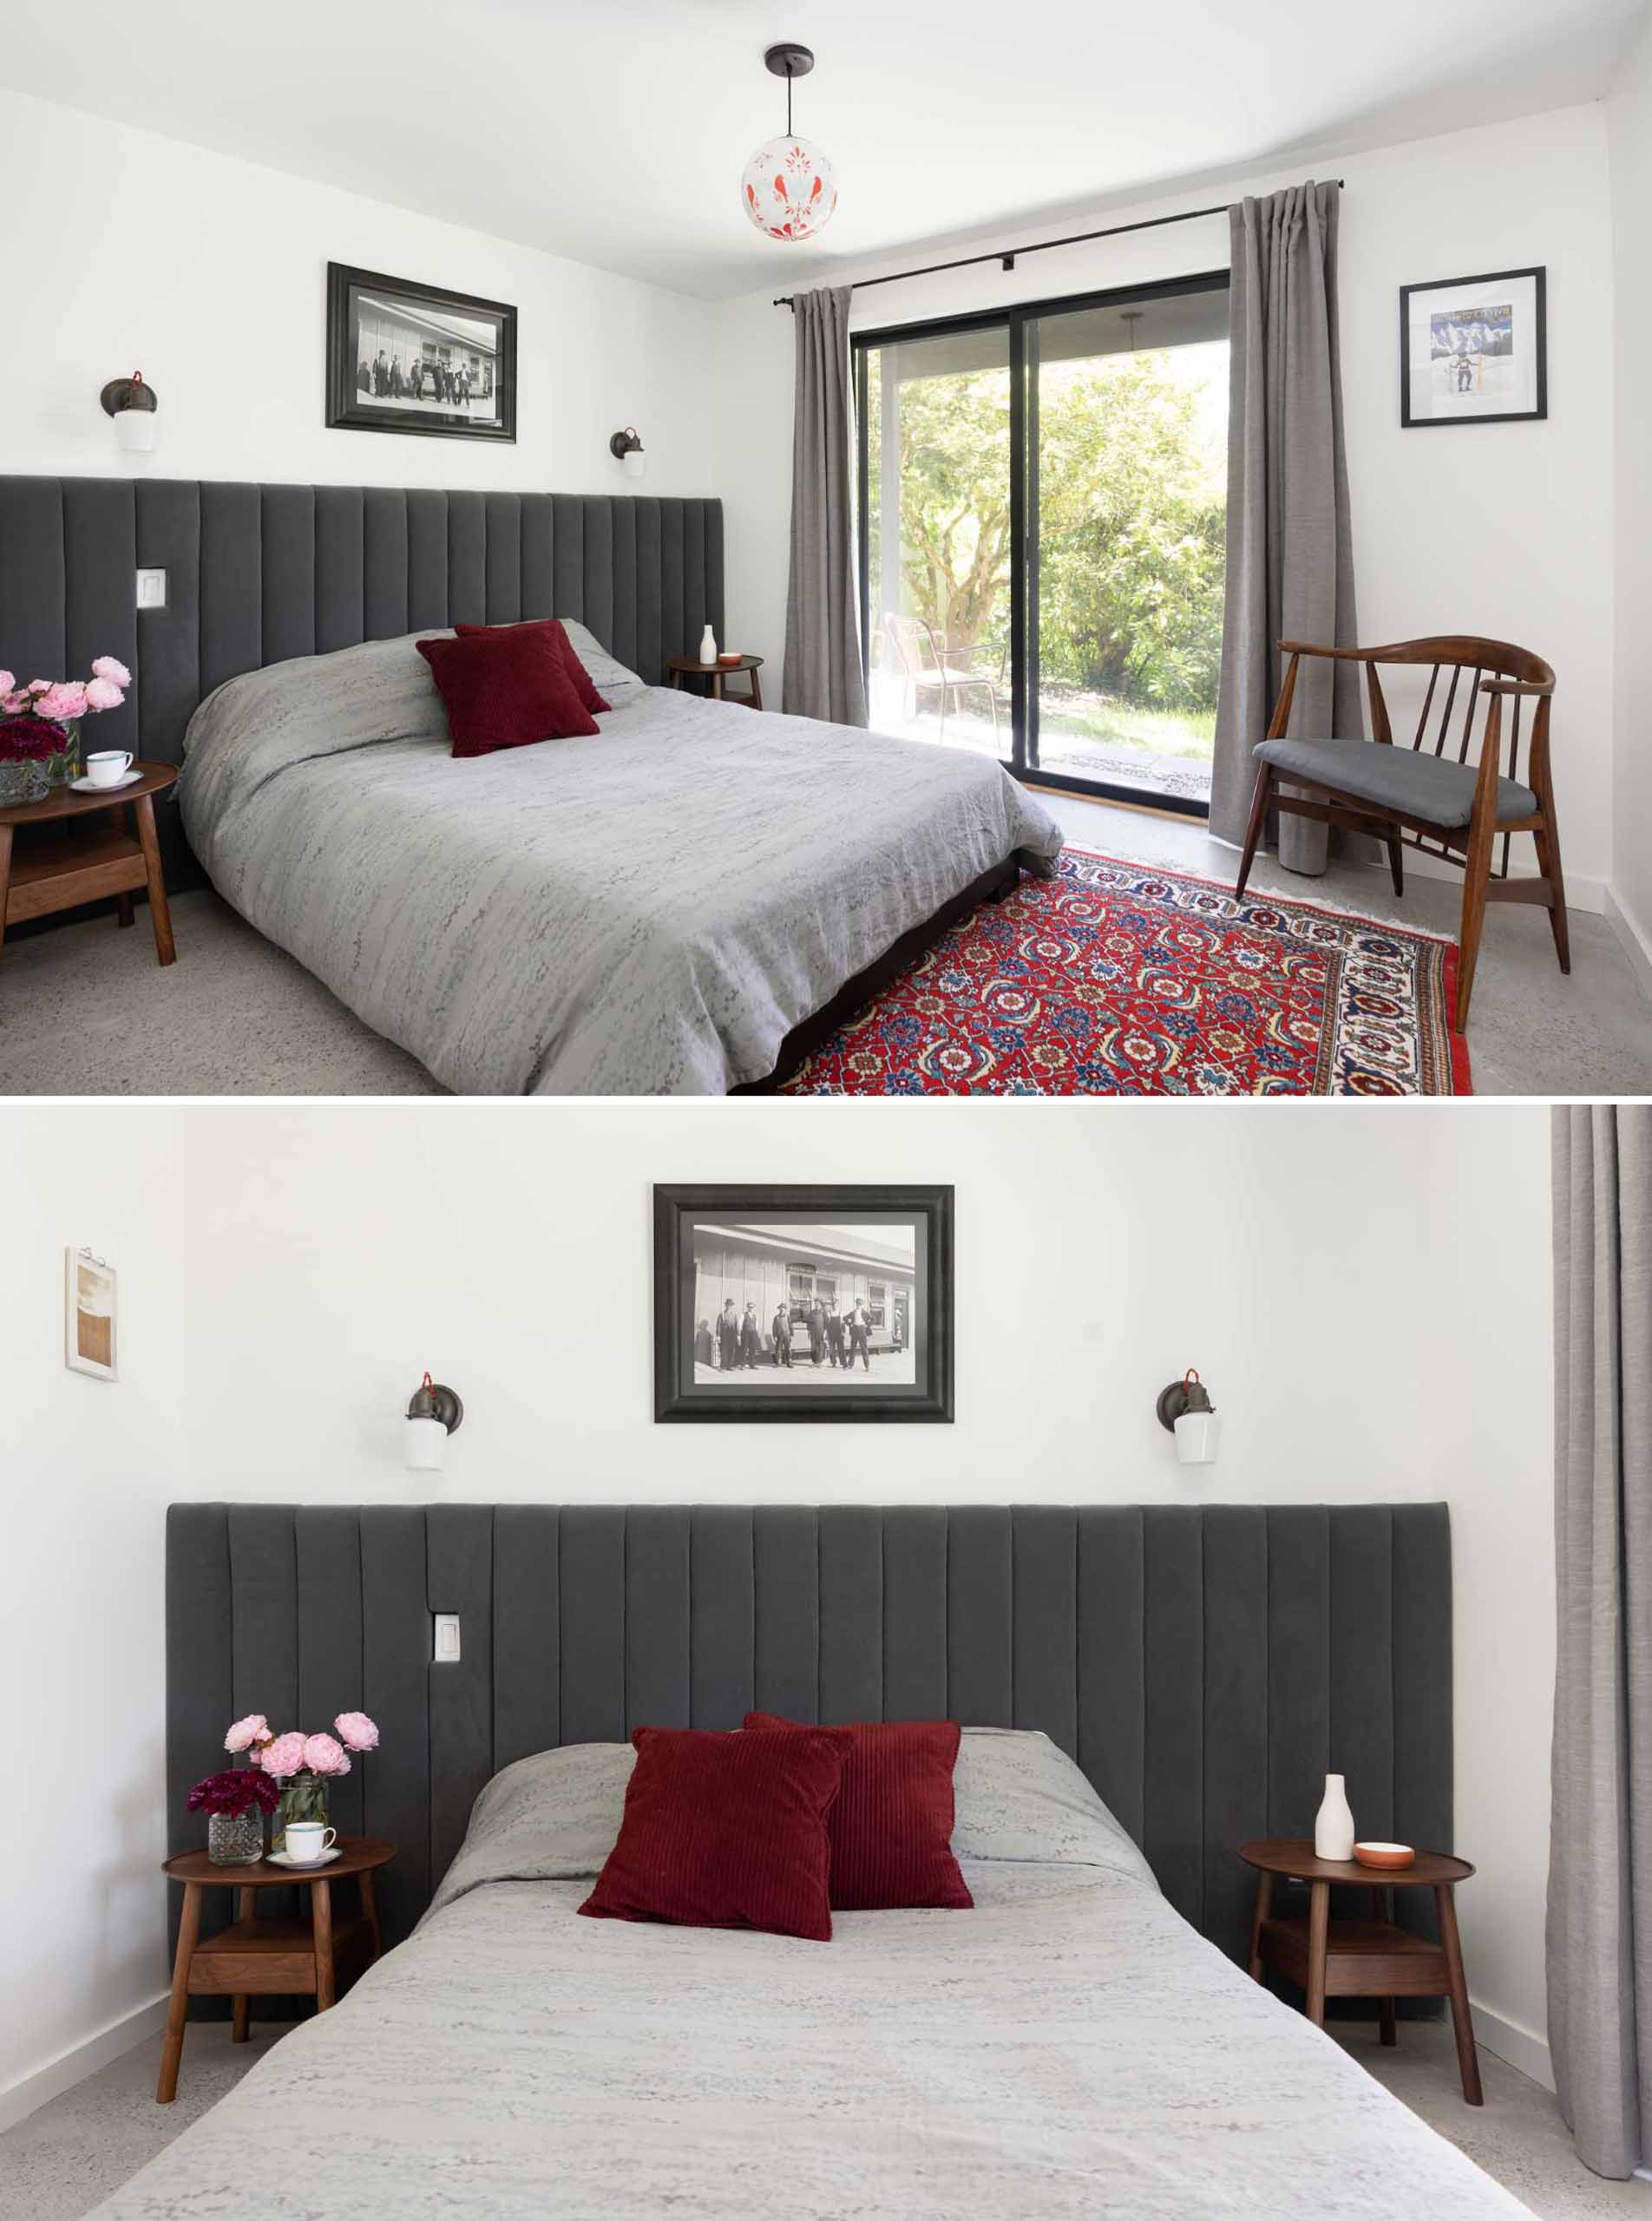 A modern bedroom with a dark grey upholstered headboard and a sliding door that opens to the outdoors.